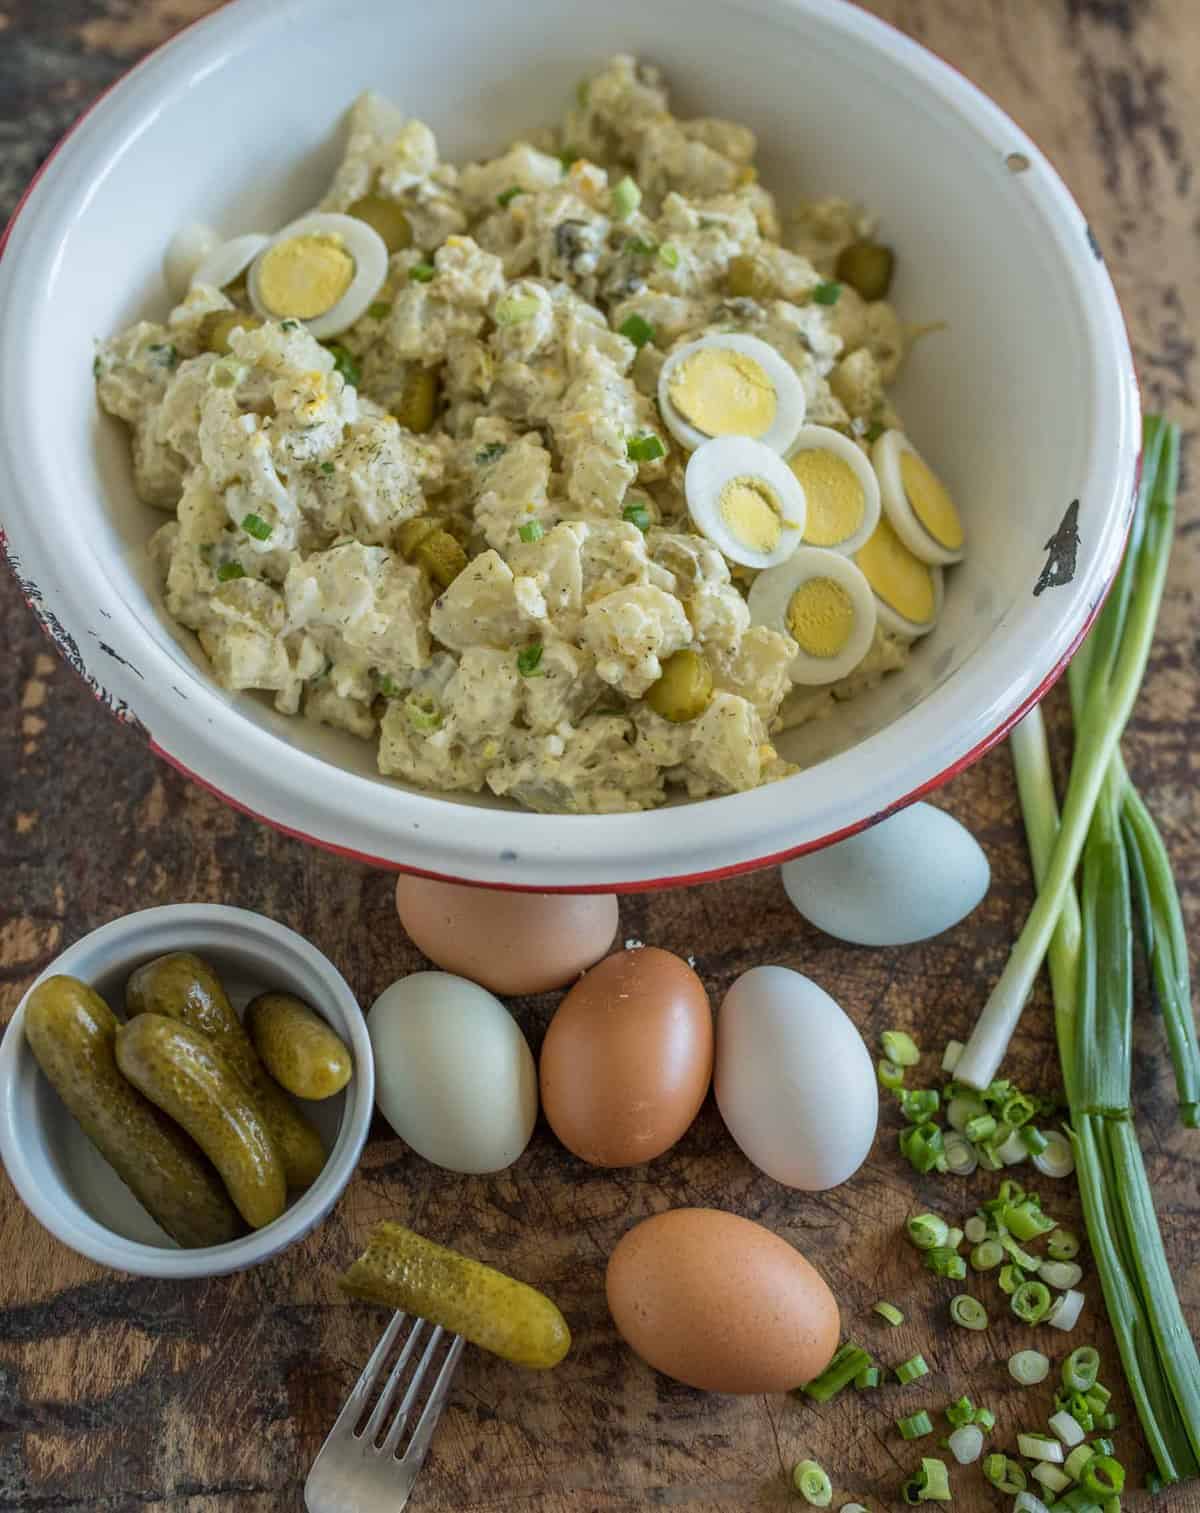 cut up potatoes and eggs in a white bowl with small pickles, eggs, and green onions beside the bowl.